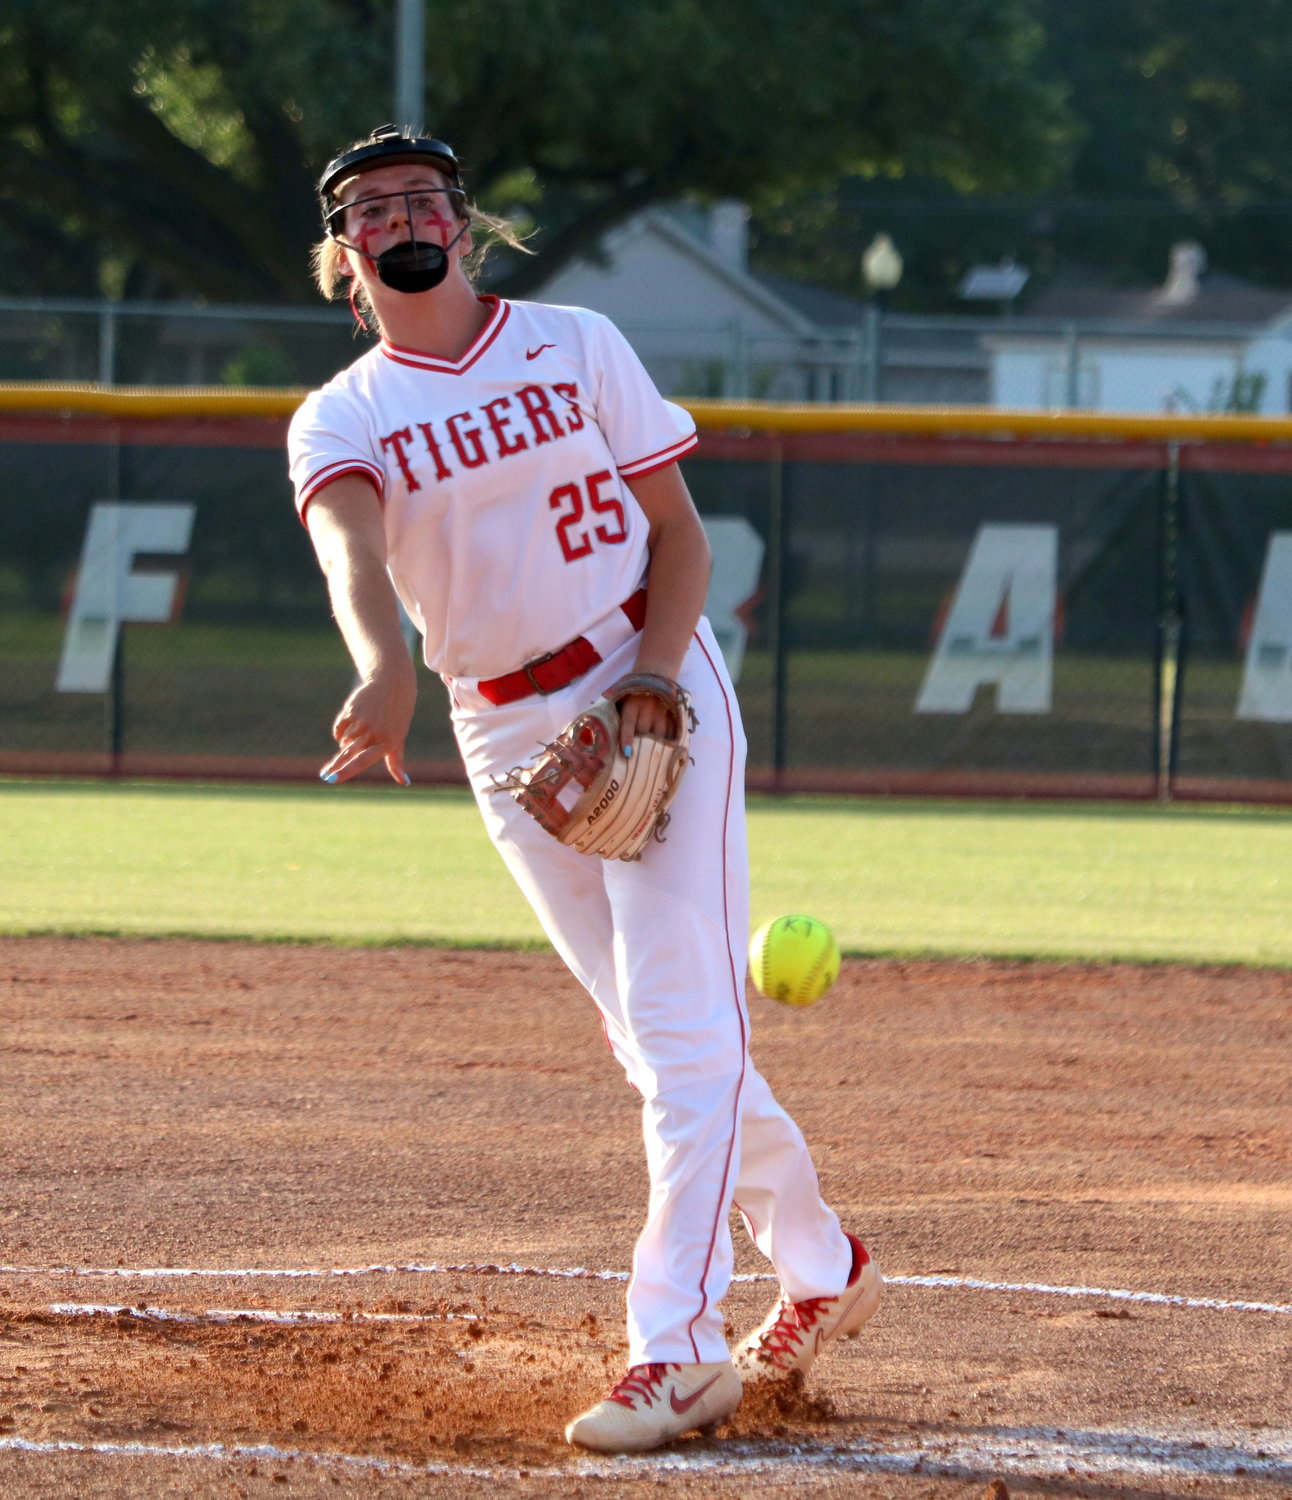 Cameryn Harrison pitches during Wednesday’s Class 6A Regional Semifinal game between Katy and Pearland at the Katy softball field.